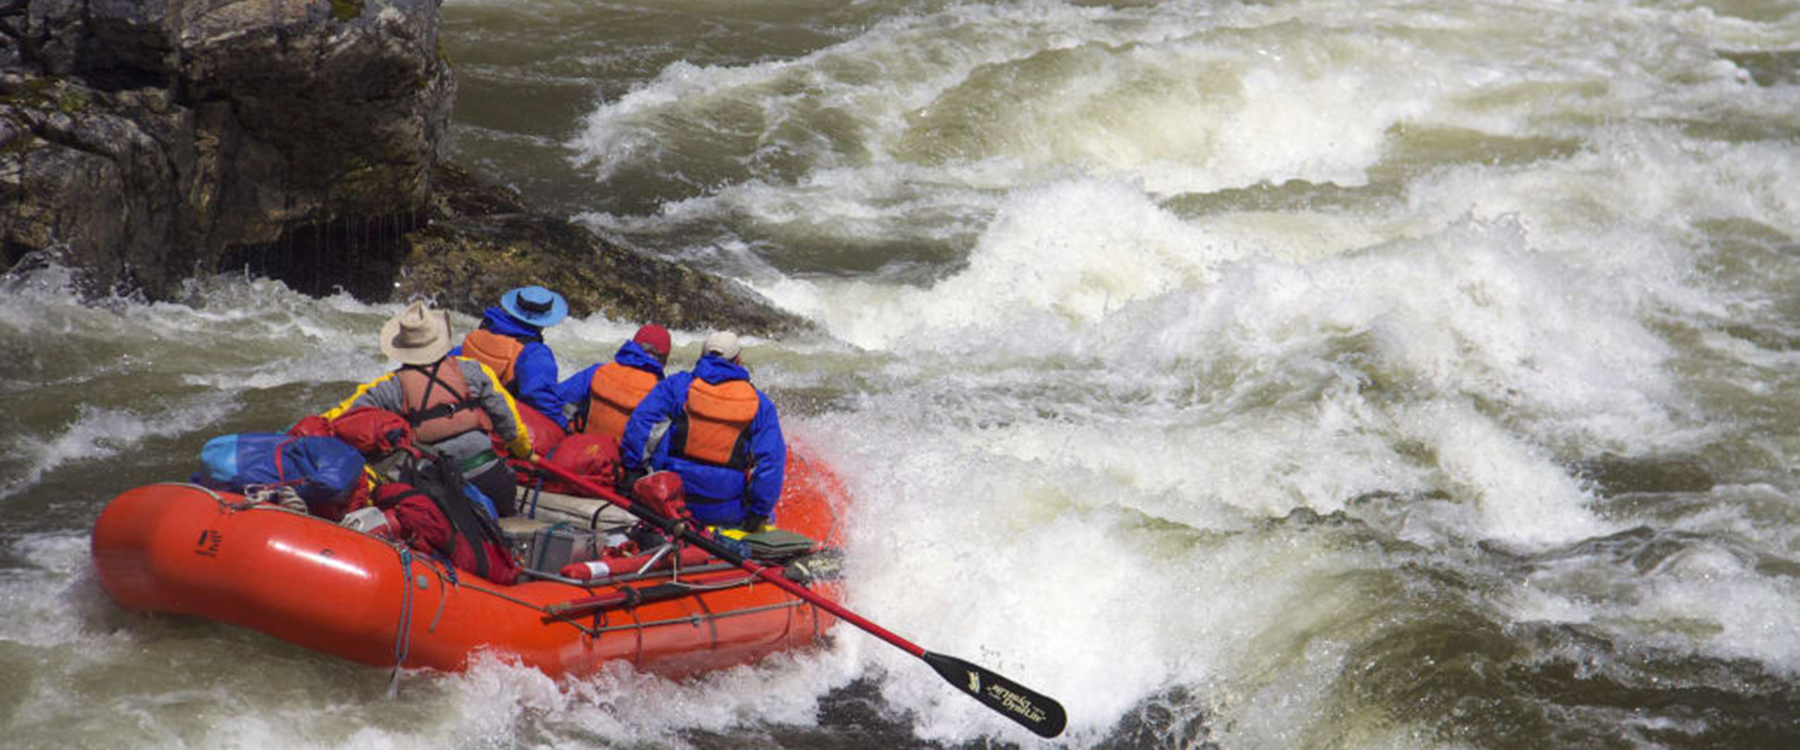 wild and scenic river rafting